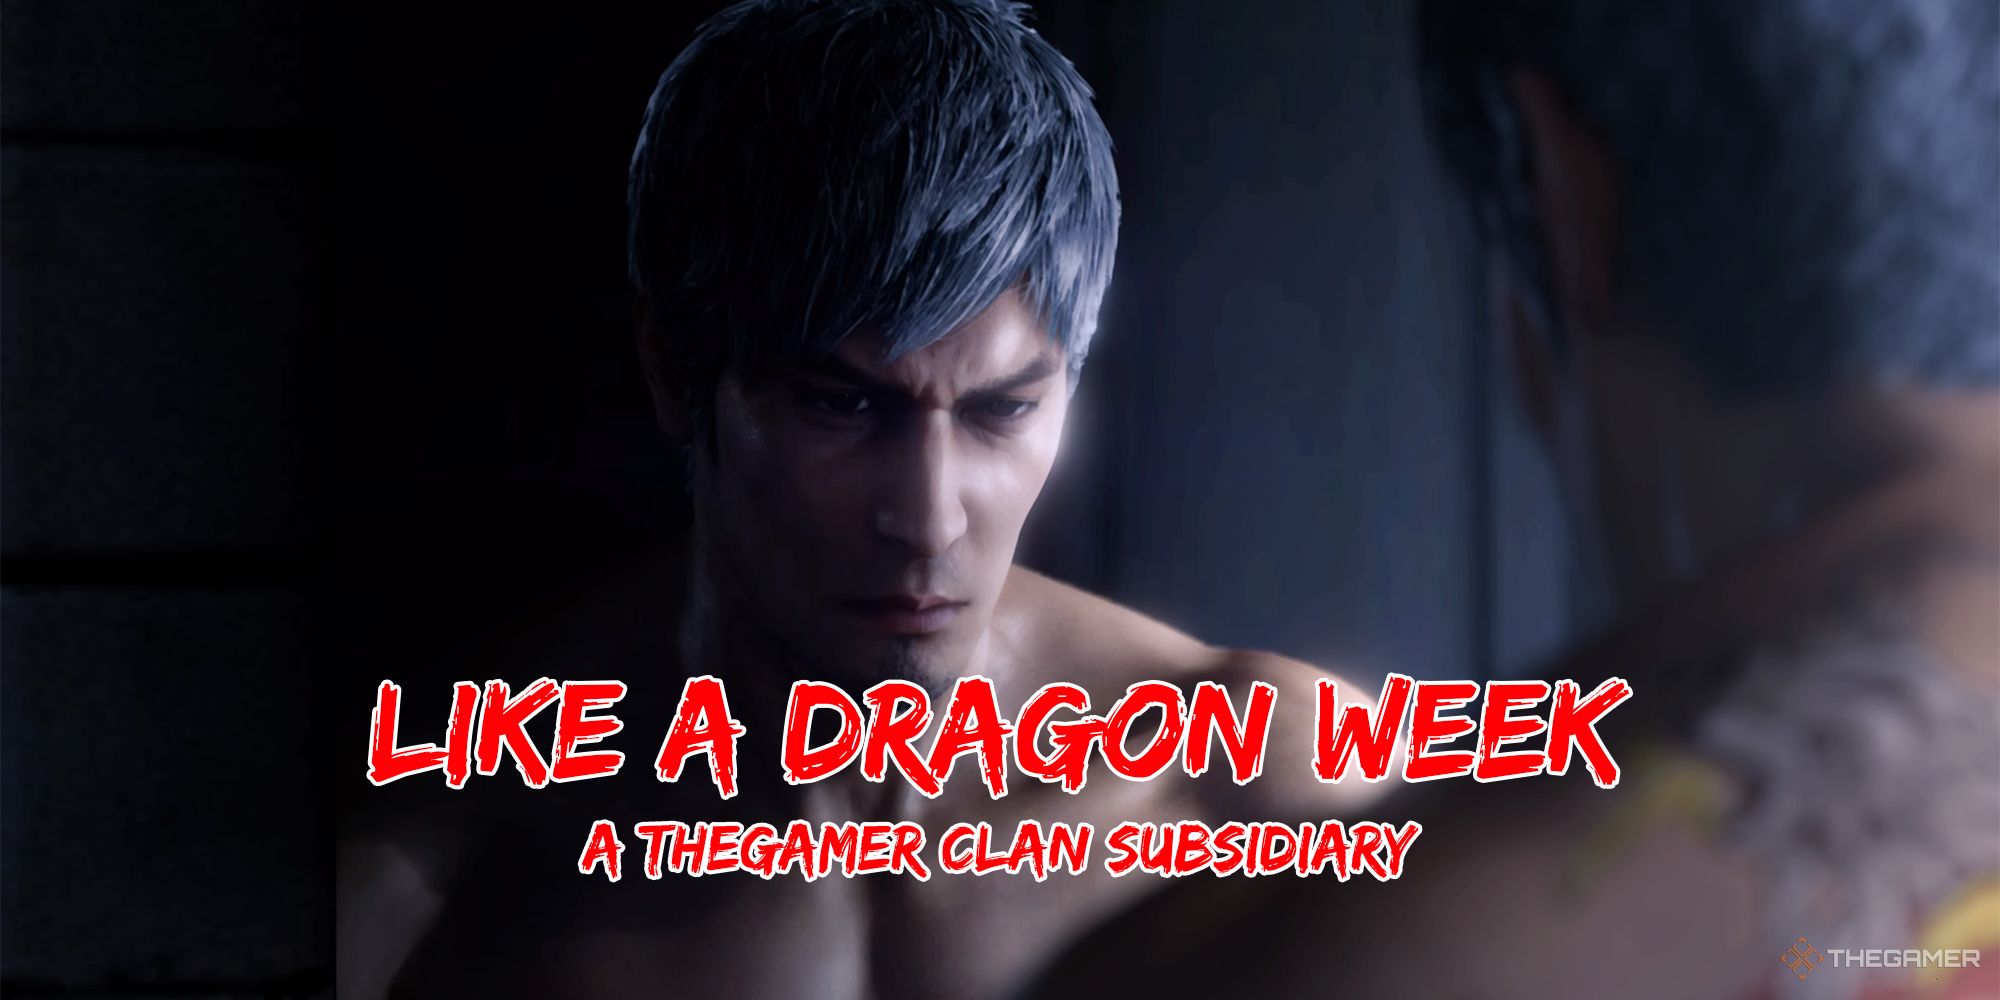 Kiryu looking into a mirror in Infinite Wealth with the Like a Dragon Week text overlaid on top.